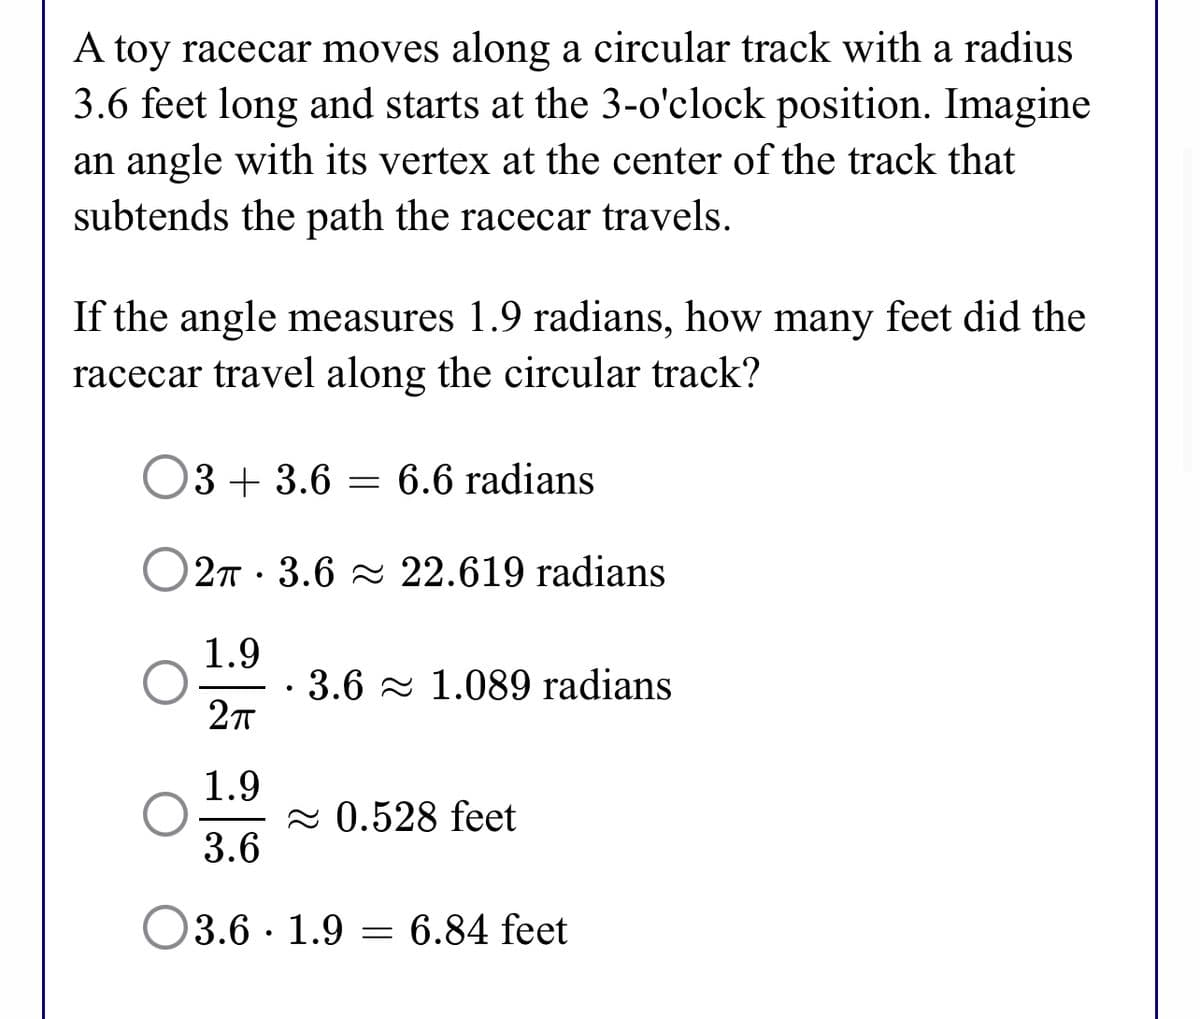 A toy racecar moves along a circular track with a radius
3.6 feet long and starts at the 3-o'clock position. Imagine
an angle with its vertex at the center of the track that
subtends the path the racecar travels.
If the angle measures 1.9 radians, how many feet did the
racecar travel along the circular track?
O3 + 3.6 = 6.6 radians
O27 · 3.6 22.619 radians
1.9
· 3.6 - 1.089 radians
27
1.9
2 0.528 feet
3.6
3.6 · 1.9 = 6.84 feet
